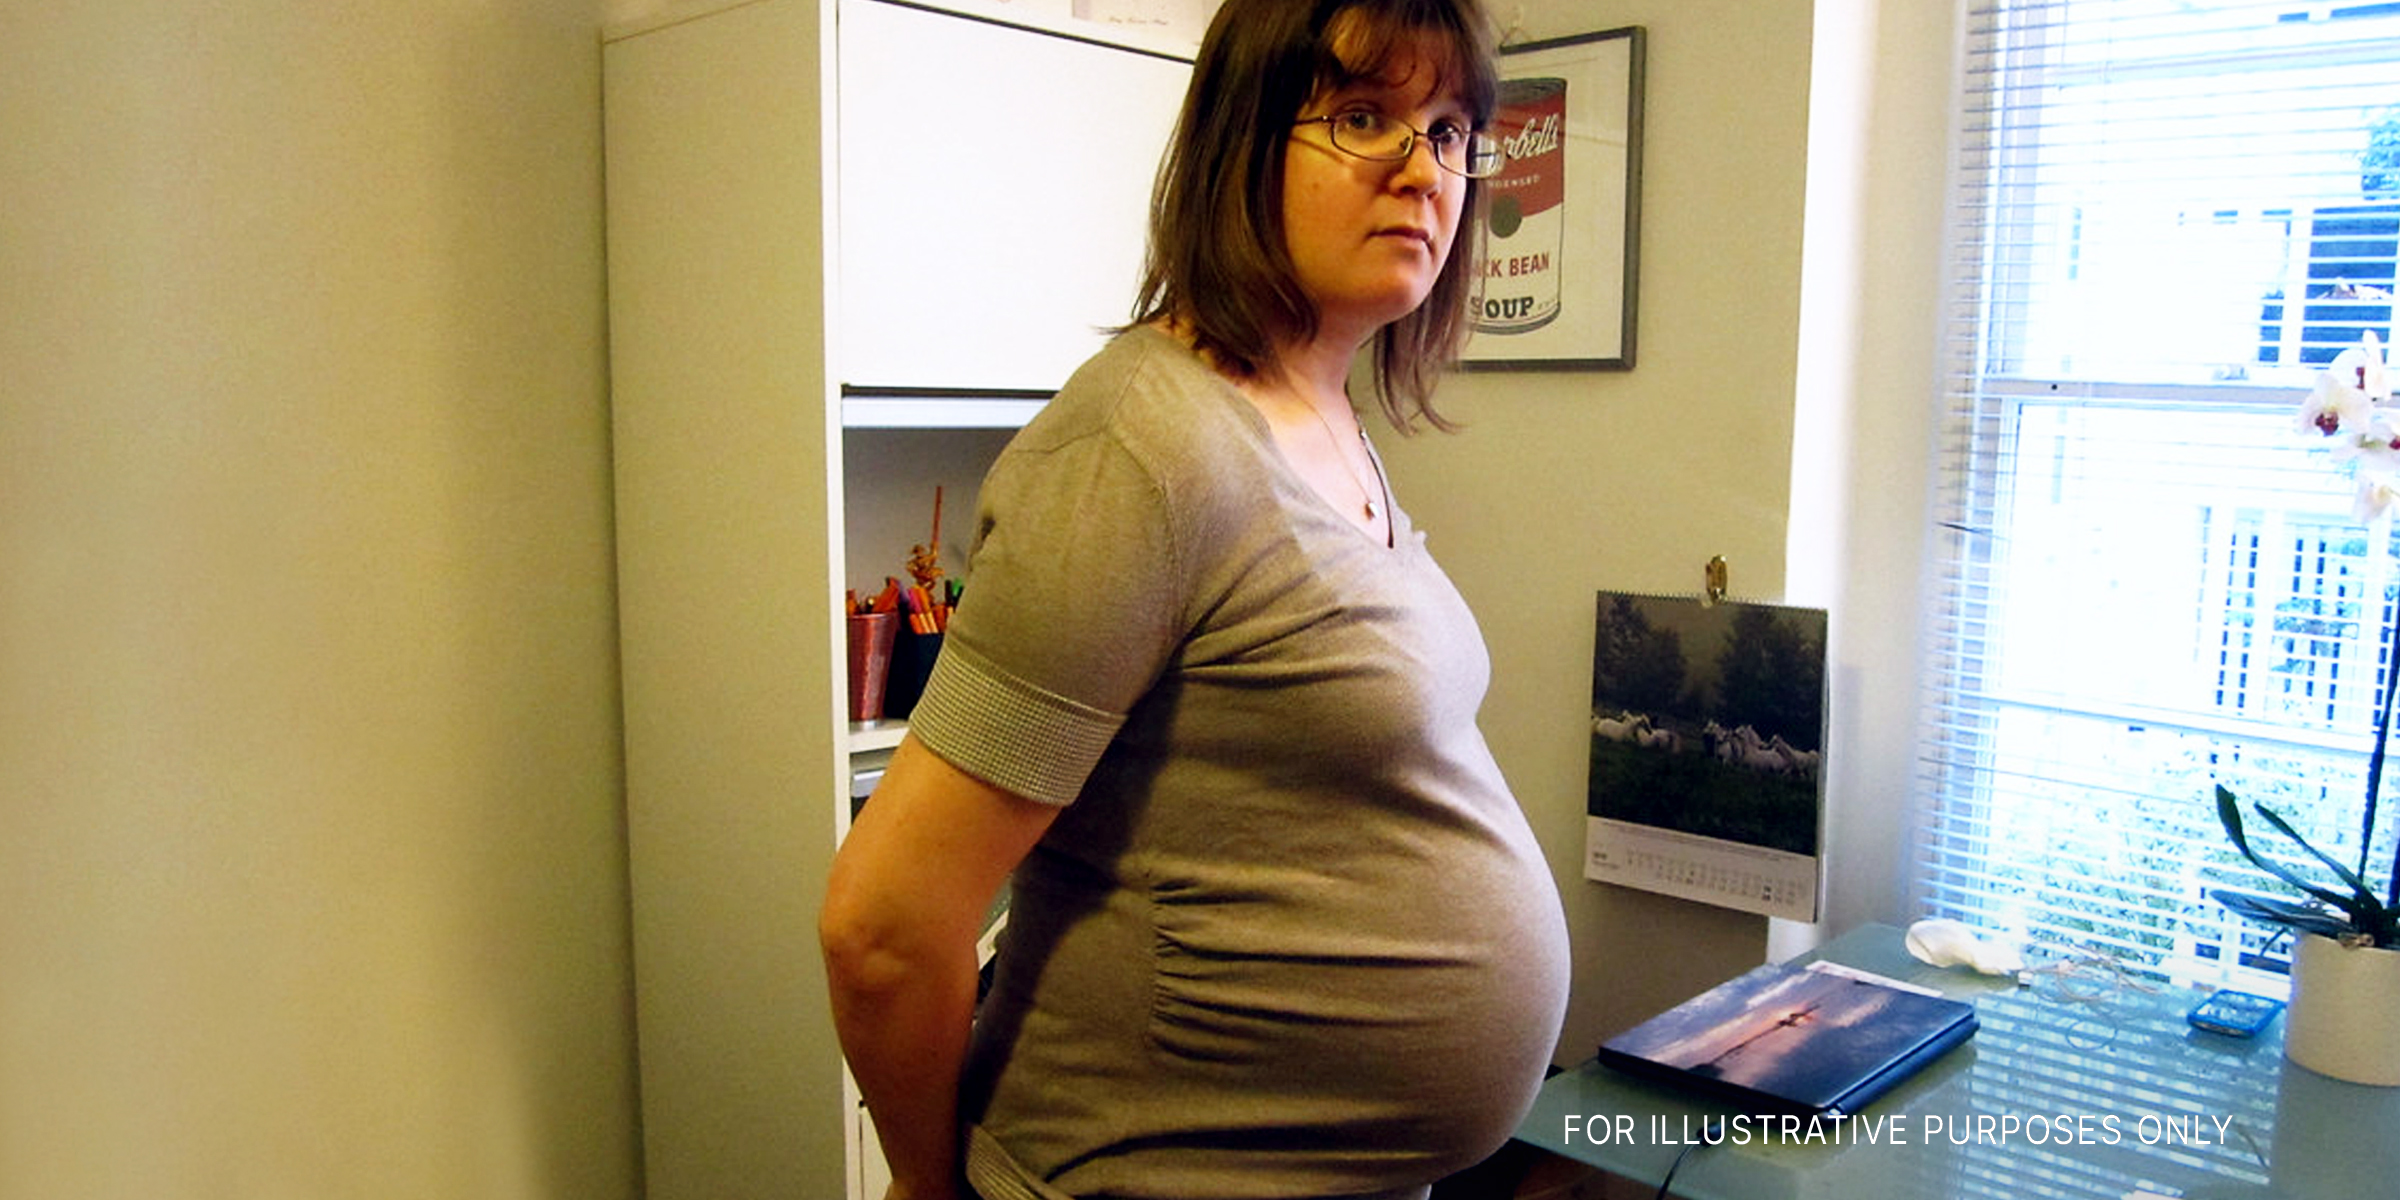 A pregnant woman | Source: flickr.com/(CC BY 2.0)/by acme